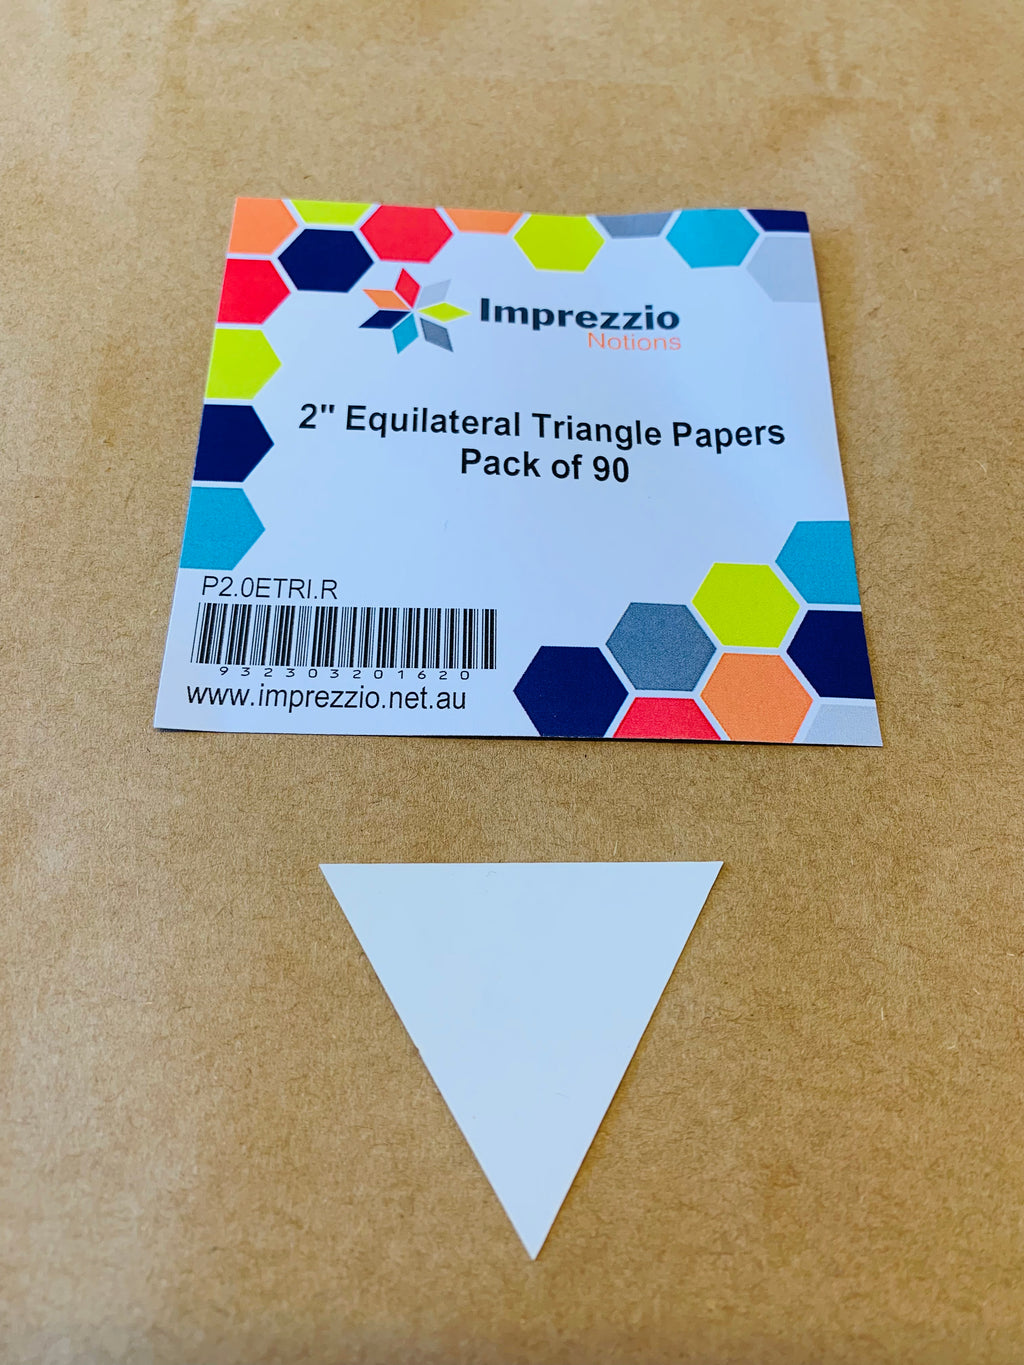 2” Equilateral Triangle Papers